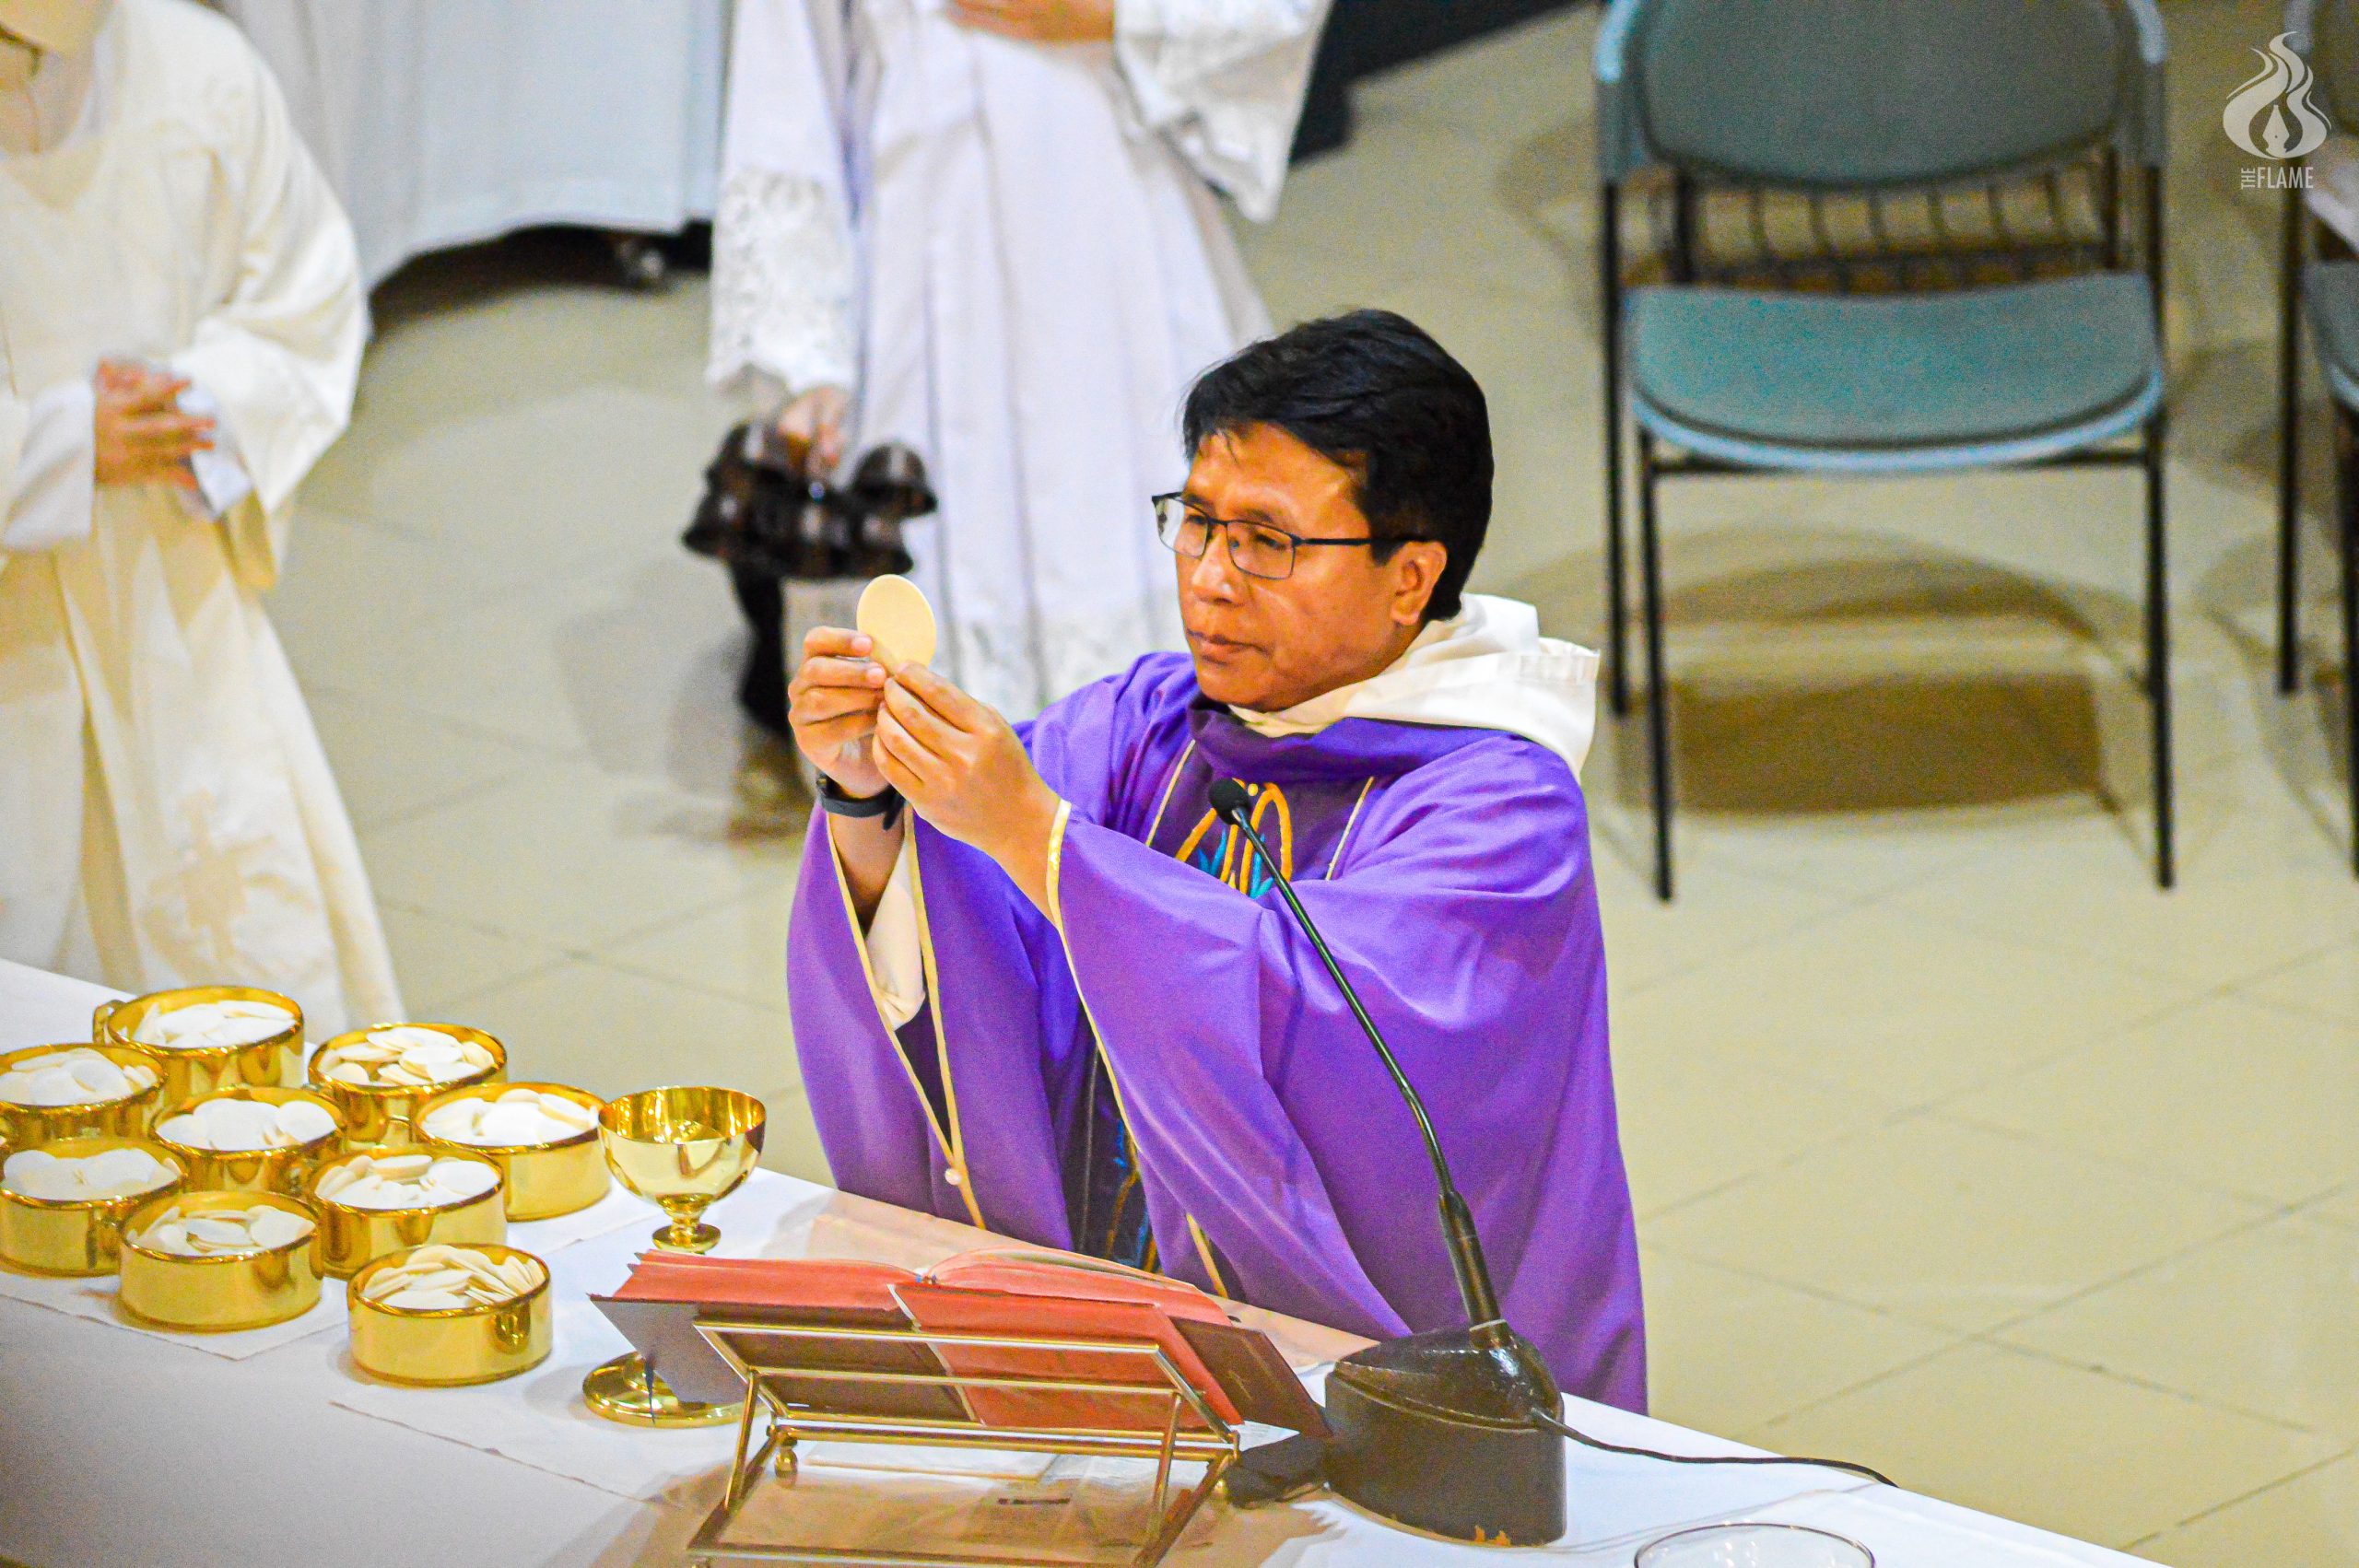 Be a sign of God’s love during Lent, Artlets told